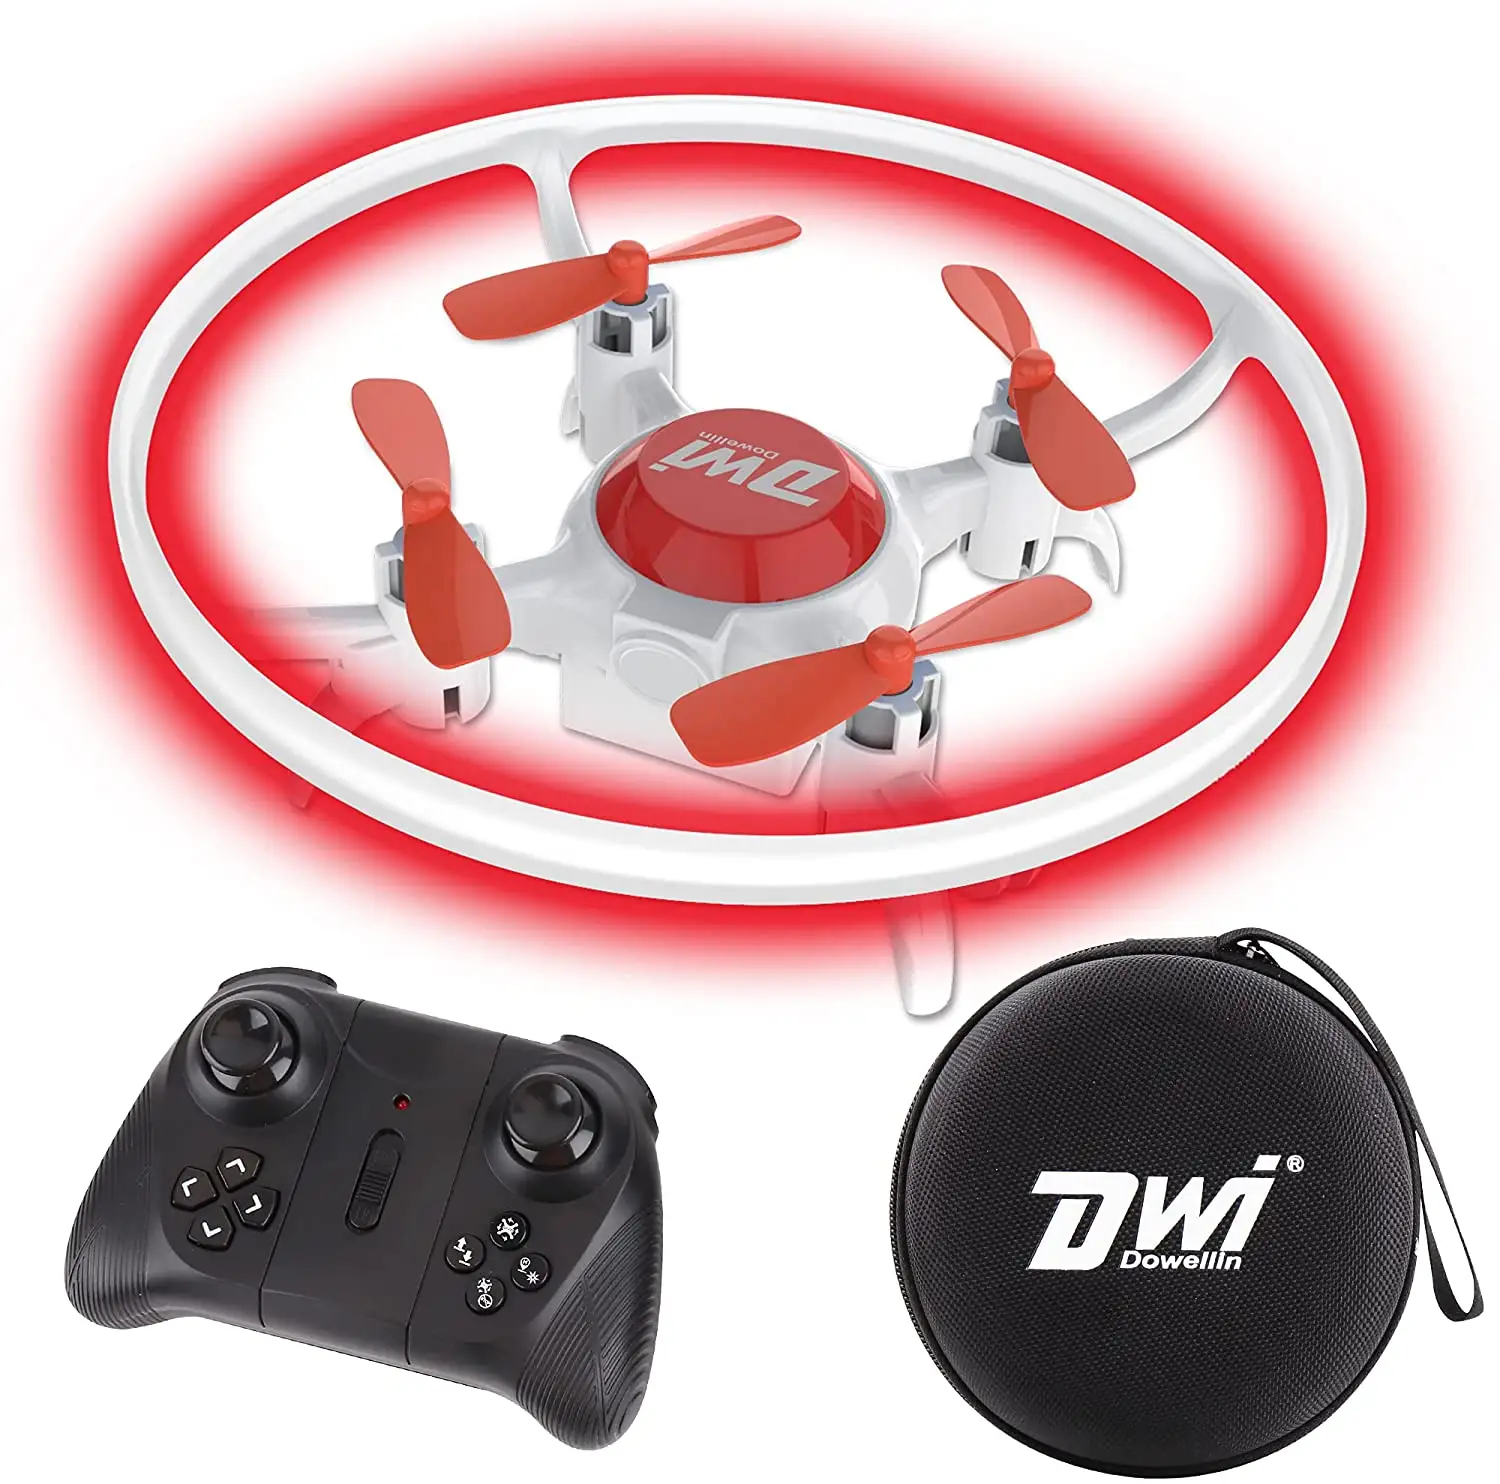 DWI 2.4G Small RC Mini Drone UFO Toy with WIFI Cameras APP Control Quadcopter Low price for Kids